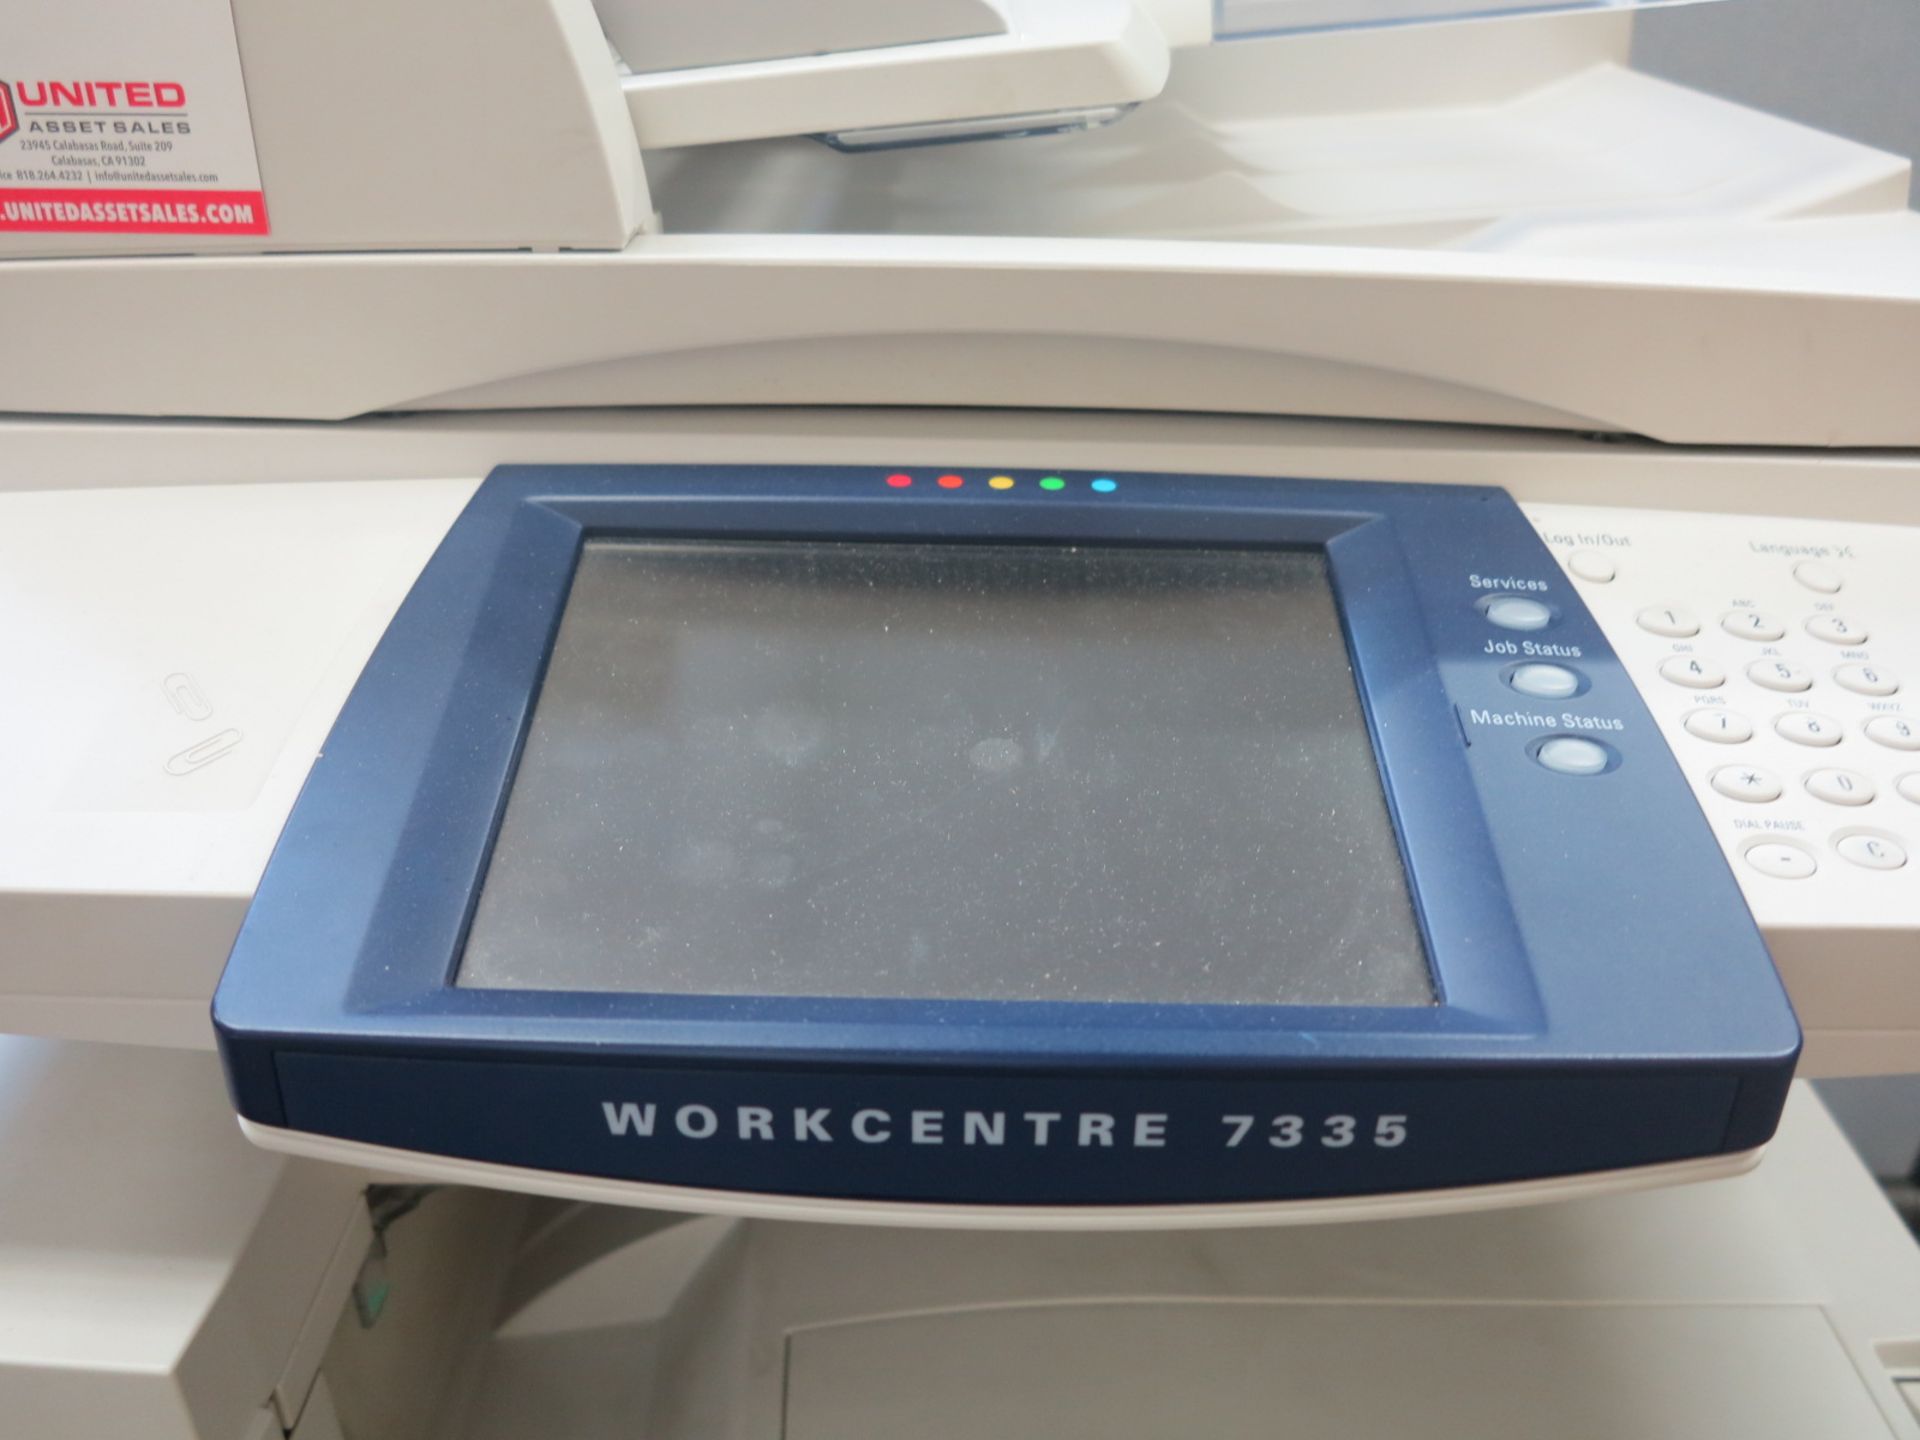 XEROX WORKCENTRE 7336 - Image 2 of 2